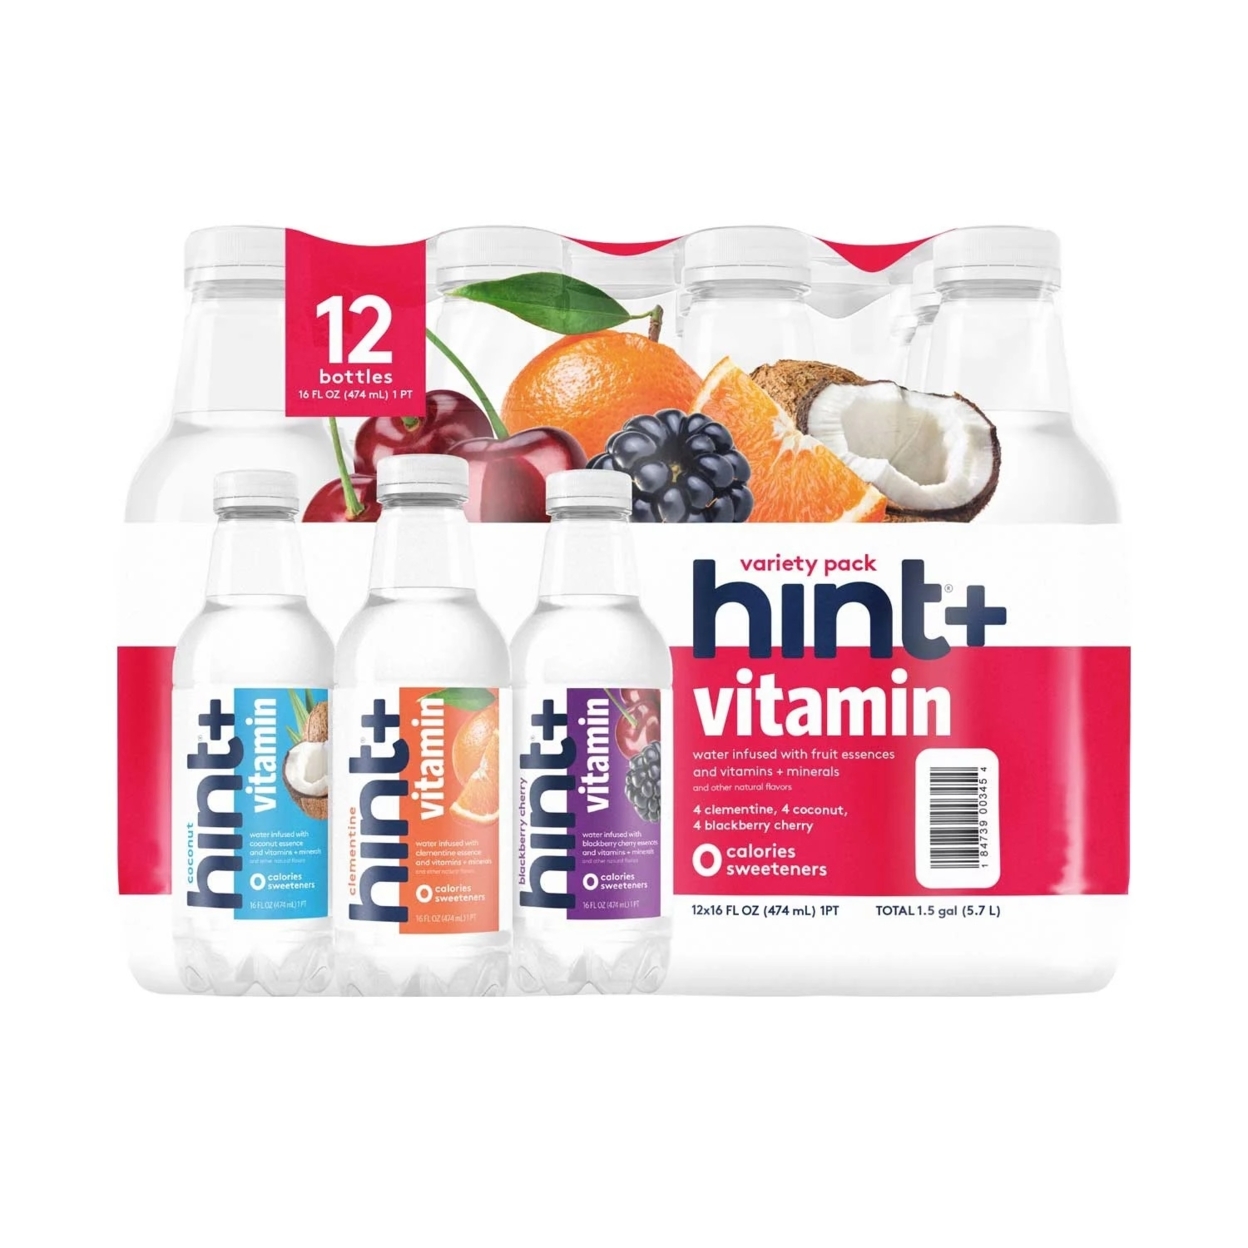 Hint+ Vitamin Flavored Water Variety Pack, 16 Fluid Ounce (Pack of 12)